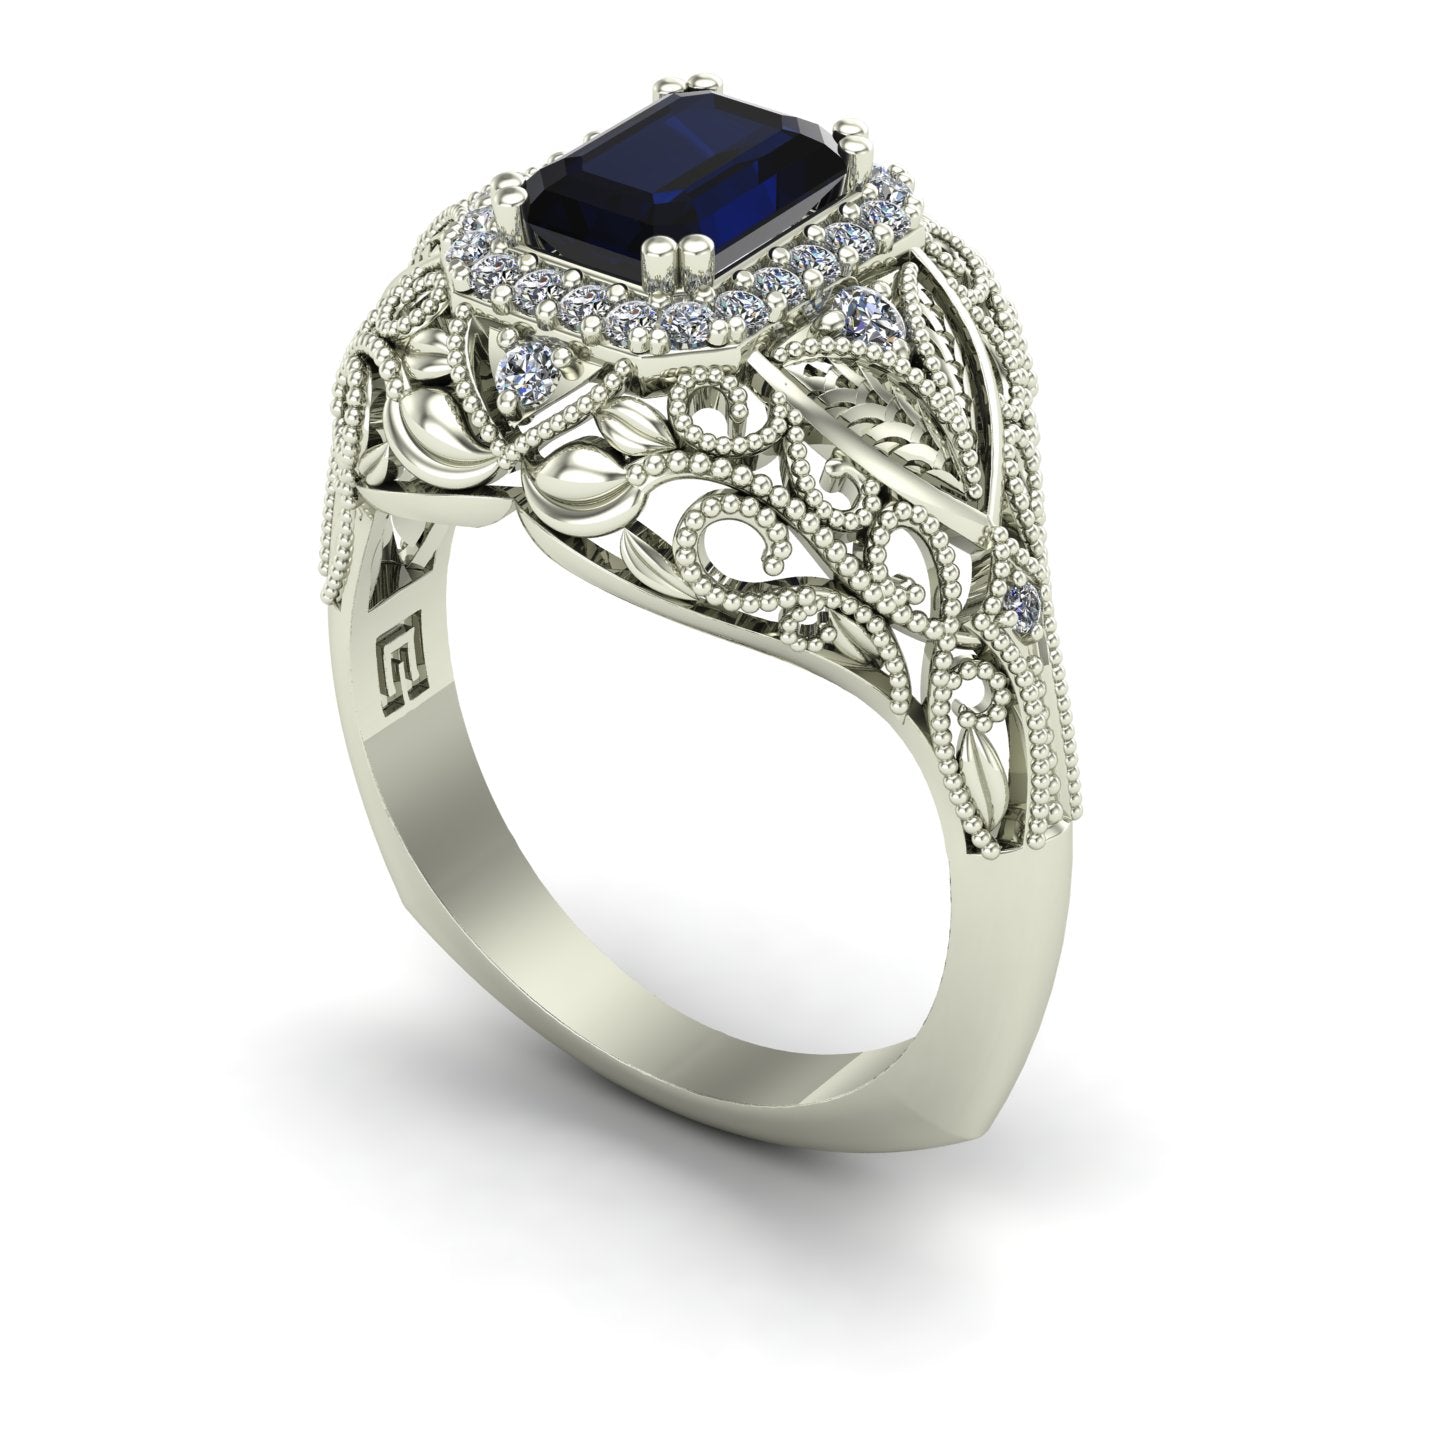 emerald cut blue sapphire and diamond ring with leaves in 14k white gold - Charles Babb Designs